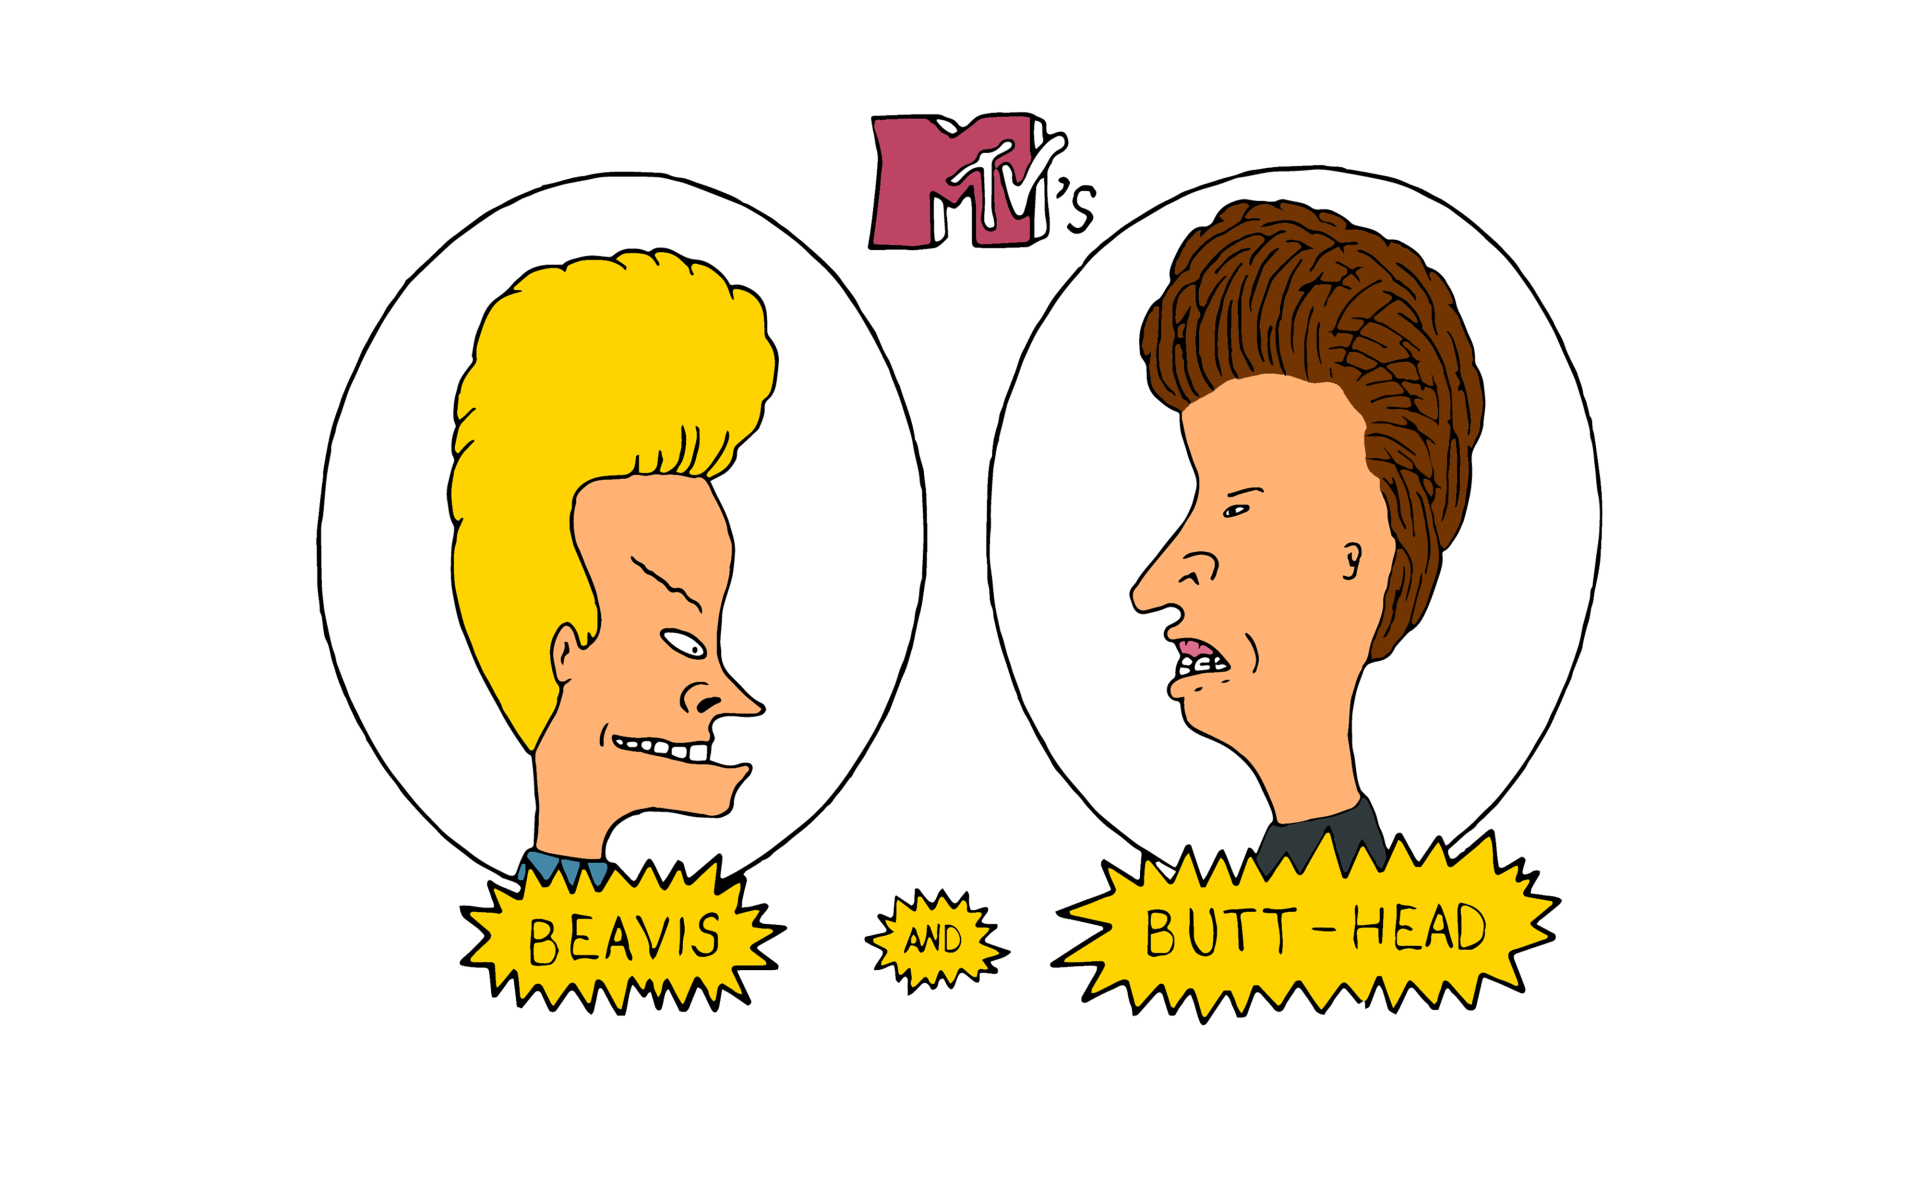 Beavis And Butthead Backgrounds.